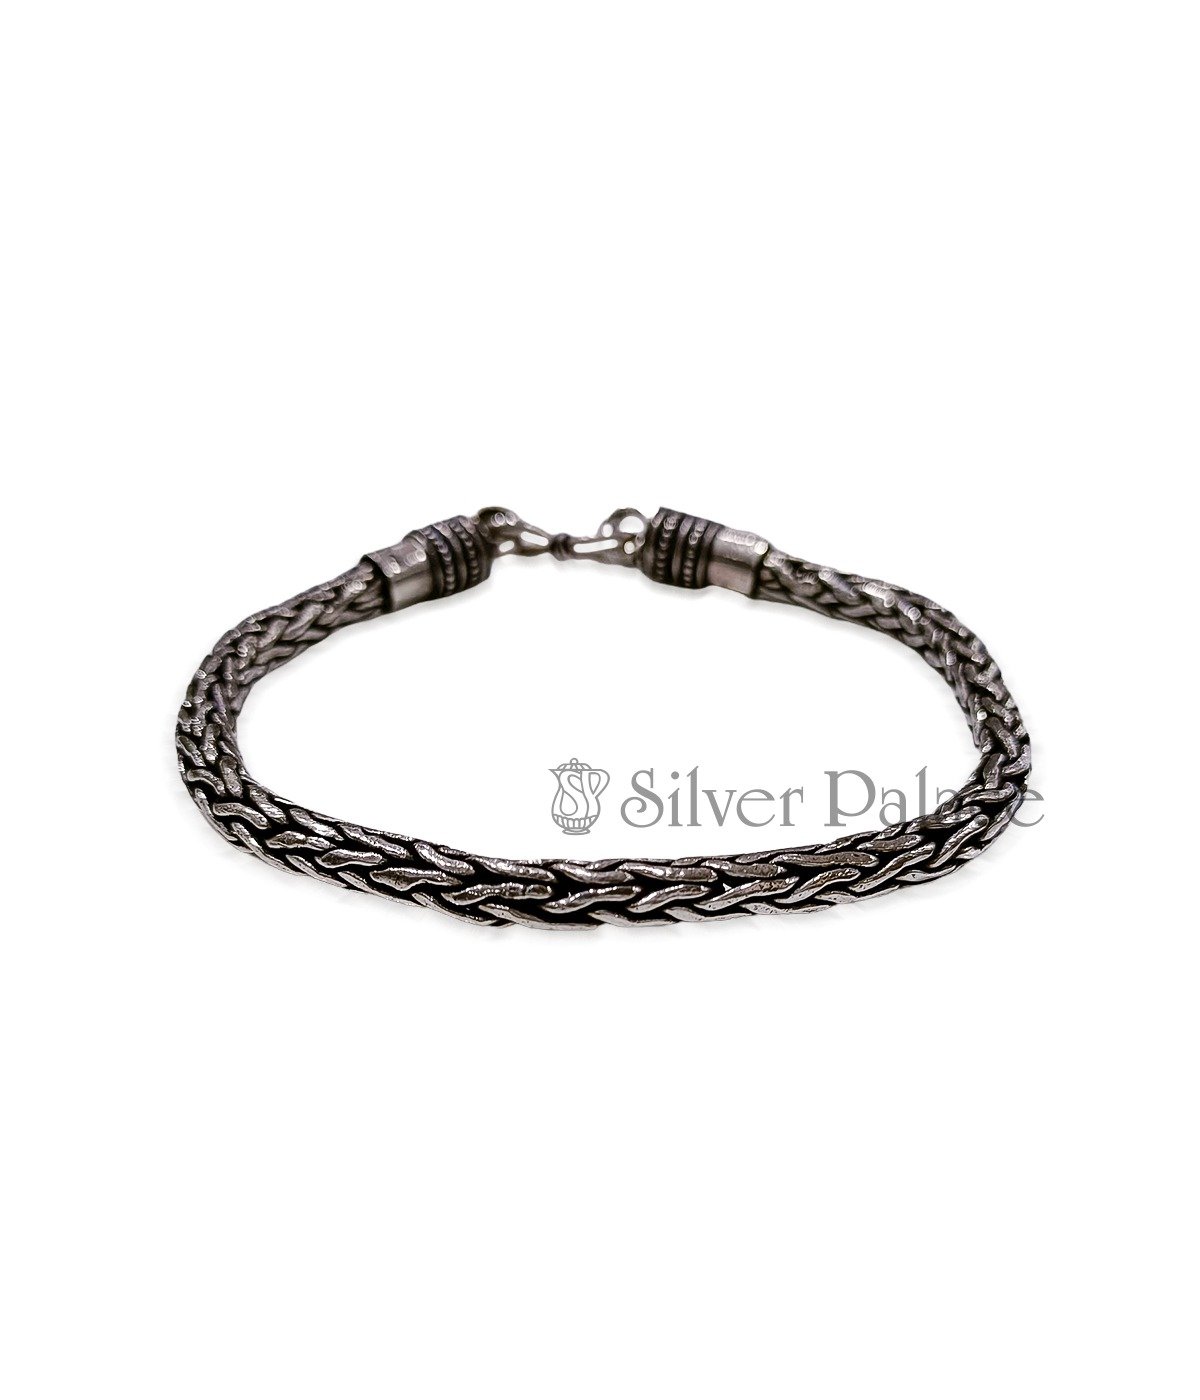 92.5 OXIDISED SILVER TWISTED CHAIN TYPE BRACELET